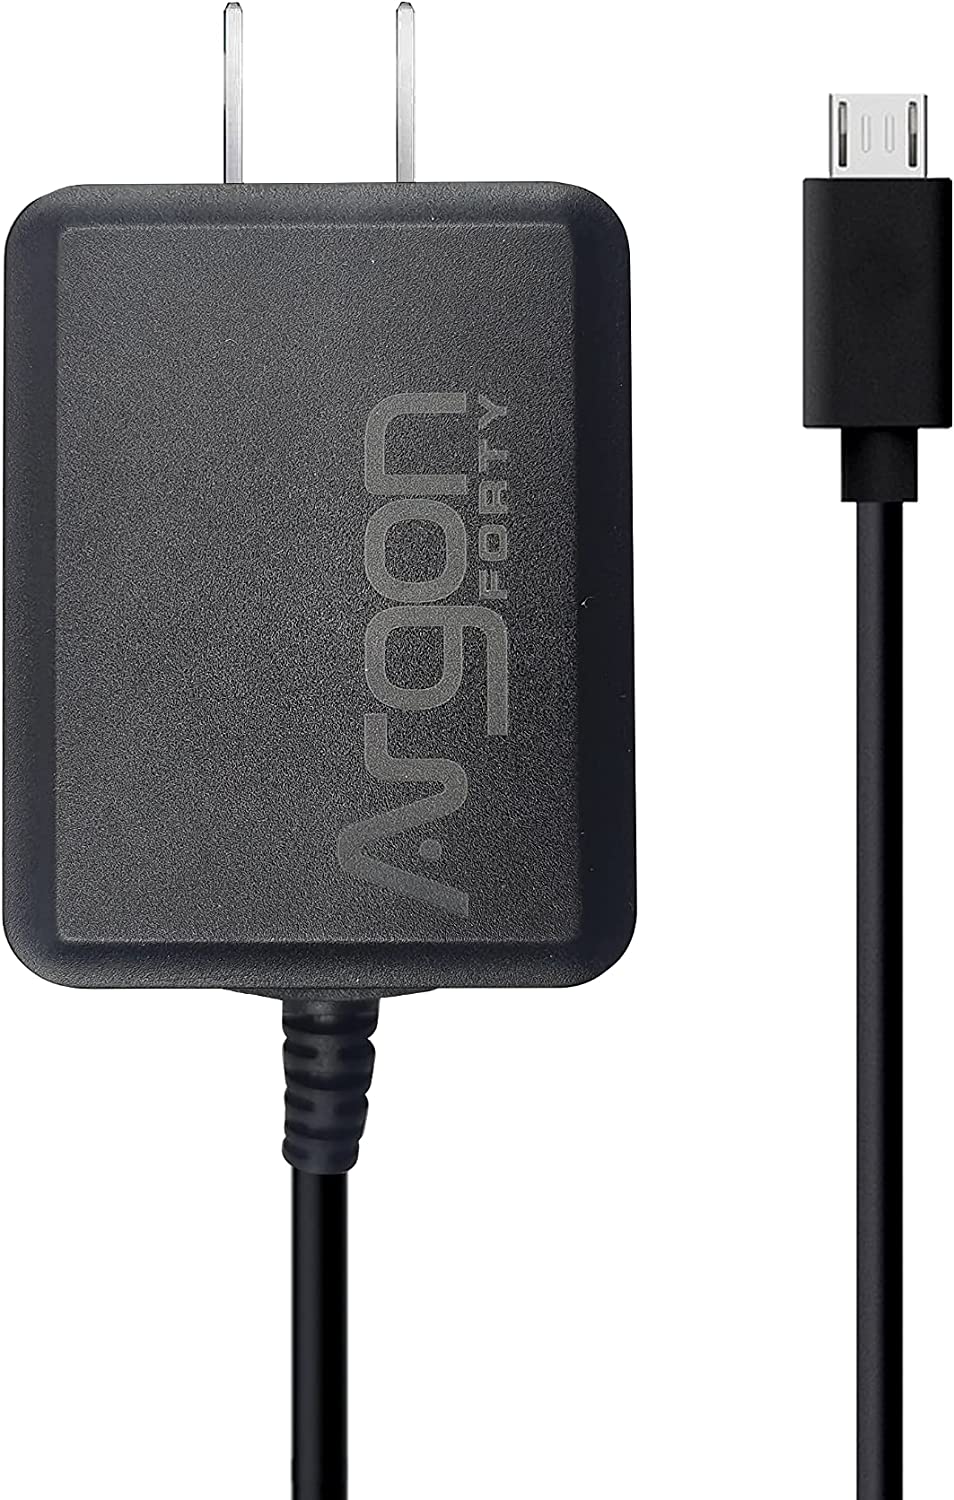 Argon ONE Micro USB Cable Power Supply 5.25 Volts 3 Amps for Raspberry Pi 4 | UL Listed | 3.3 Feet Long Cable with Micro USB Connector | Micro USB Cable and Wall Charger.